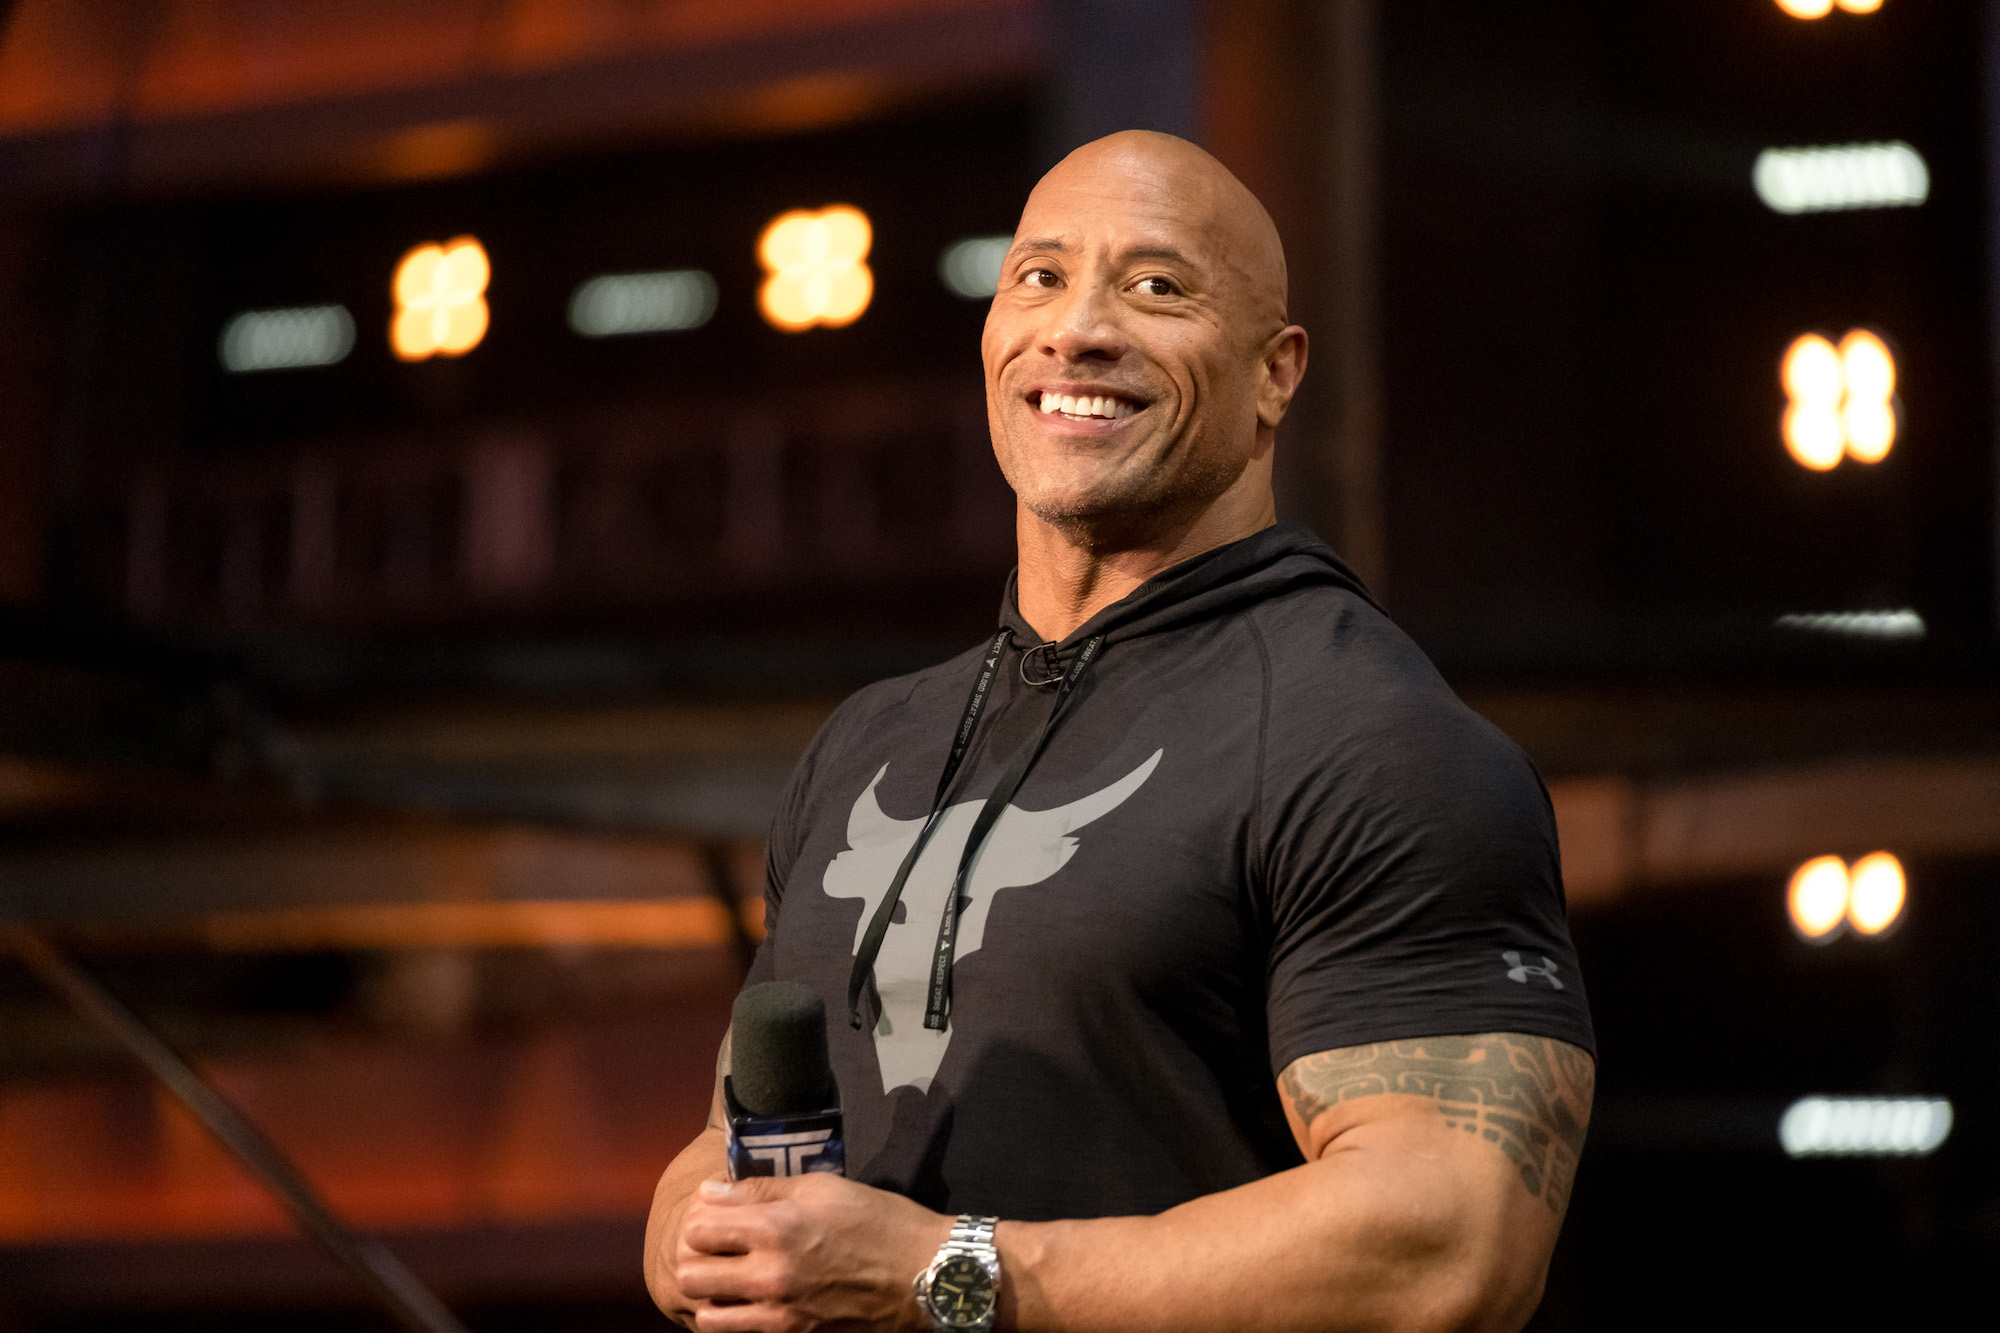 38 Best Dwayne “The Rock” Johnson Movies To Fill Your Life With